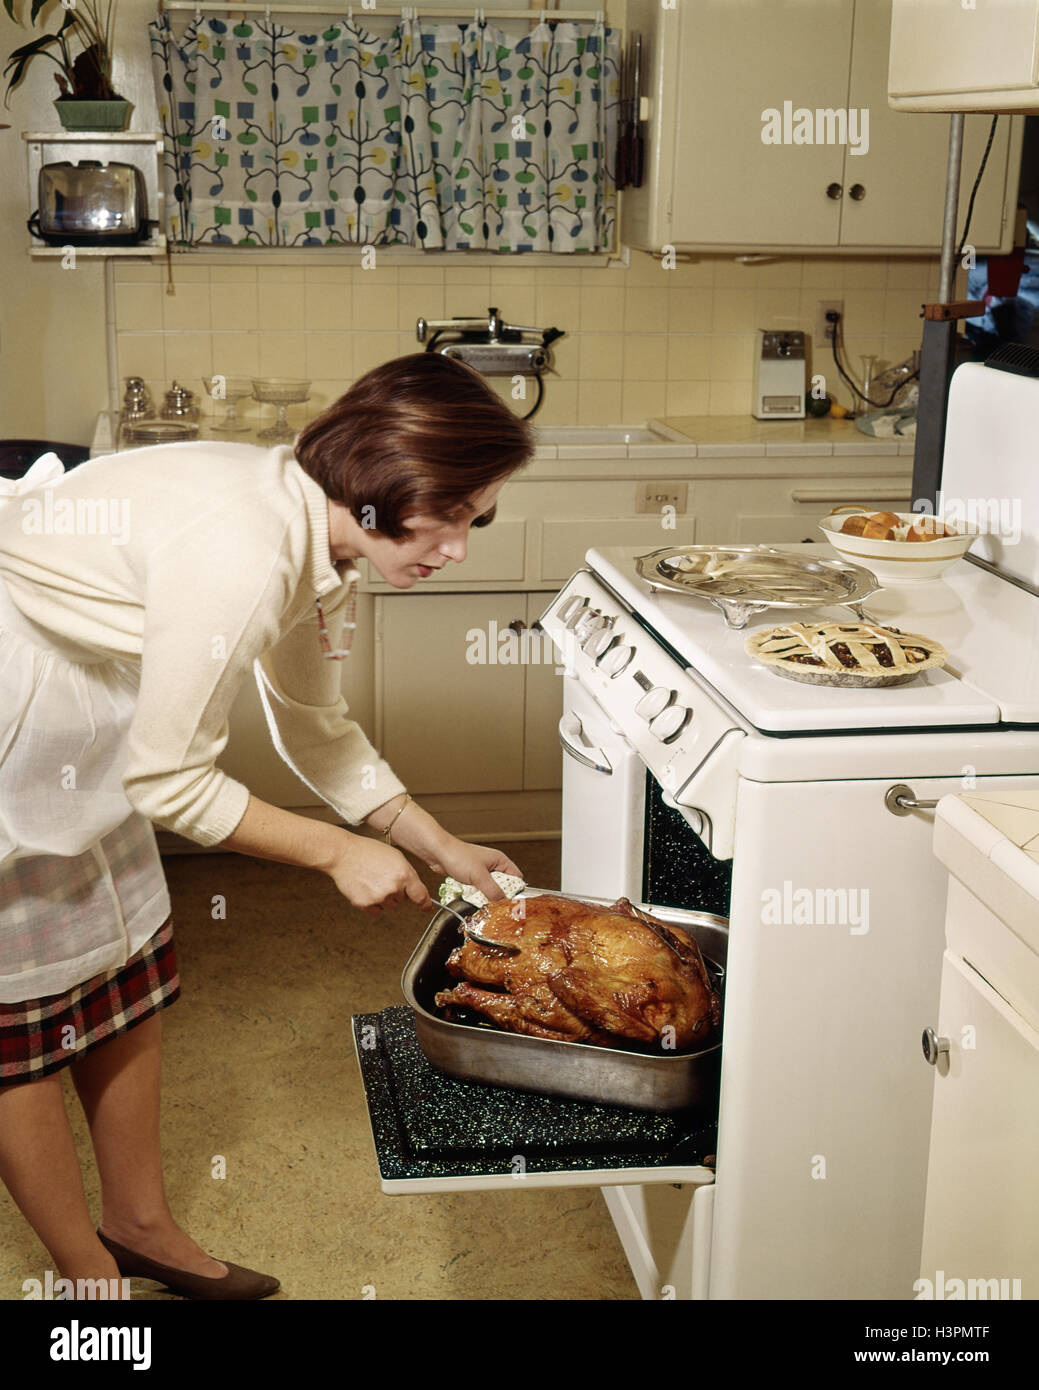 1950s WOMAN HOUSEWIFE BASTING THANKSGIVING ROAST TURKEY IN OVEN Stock Photo